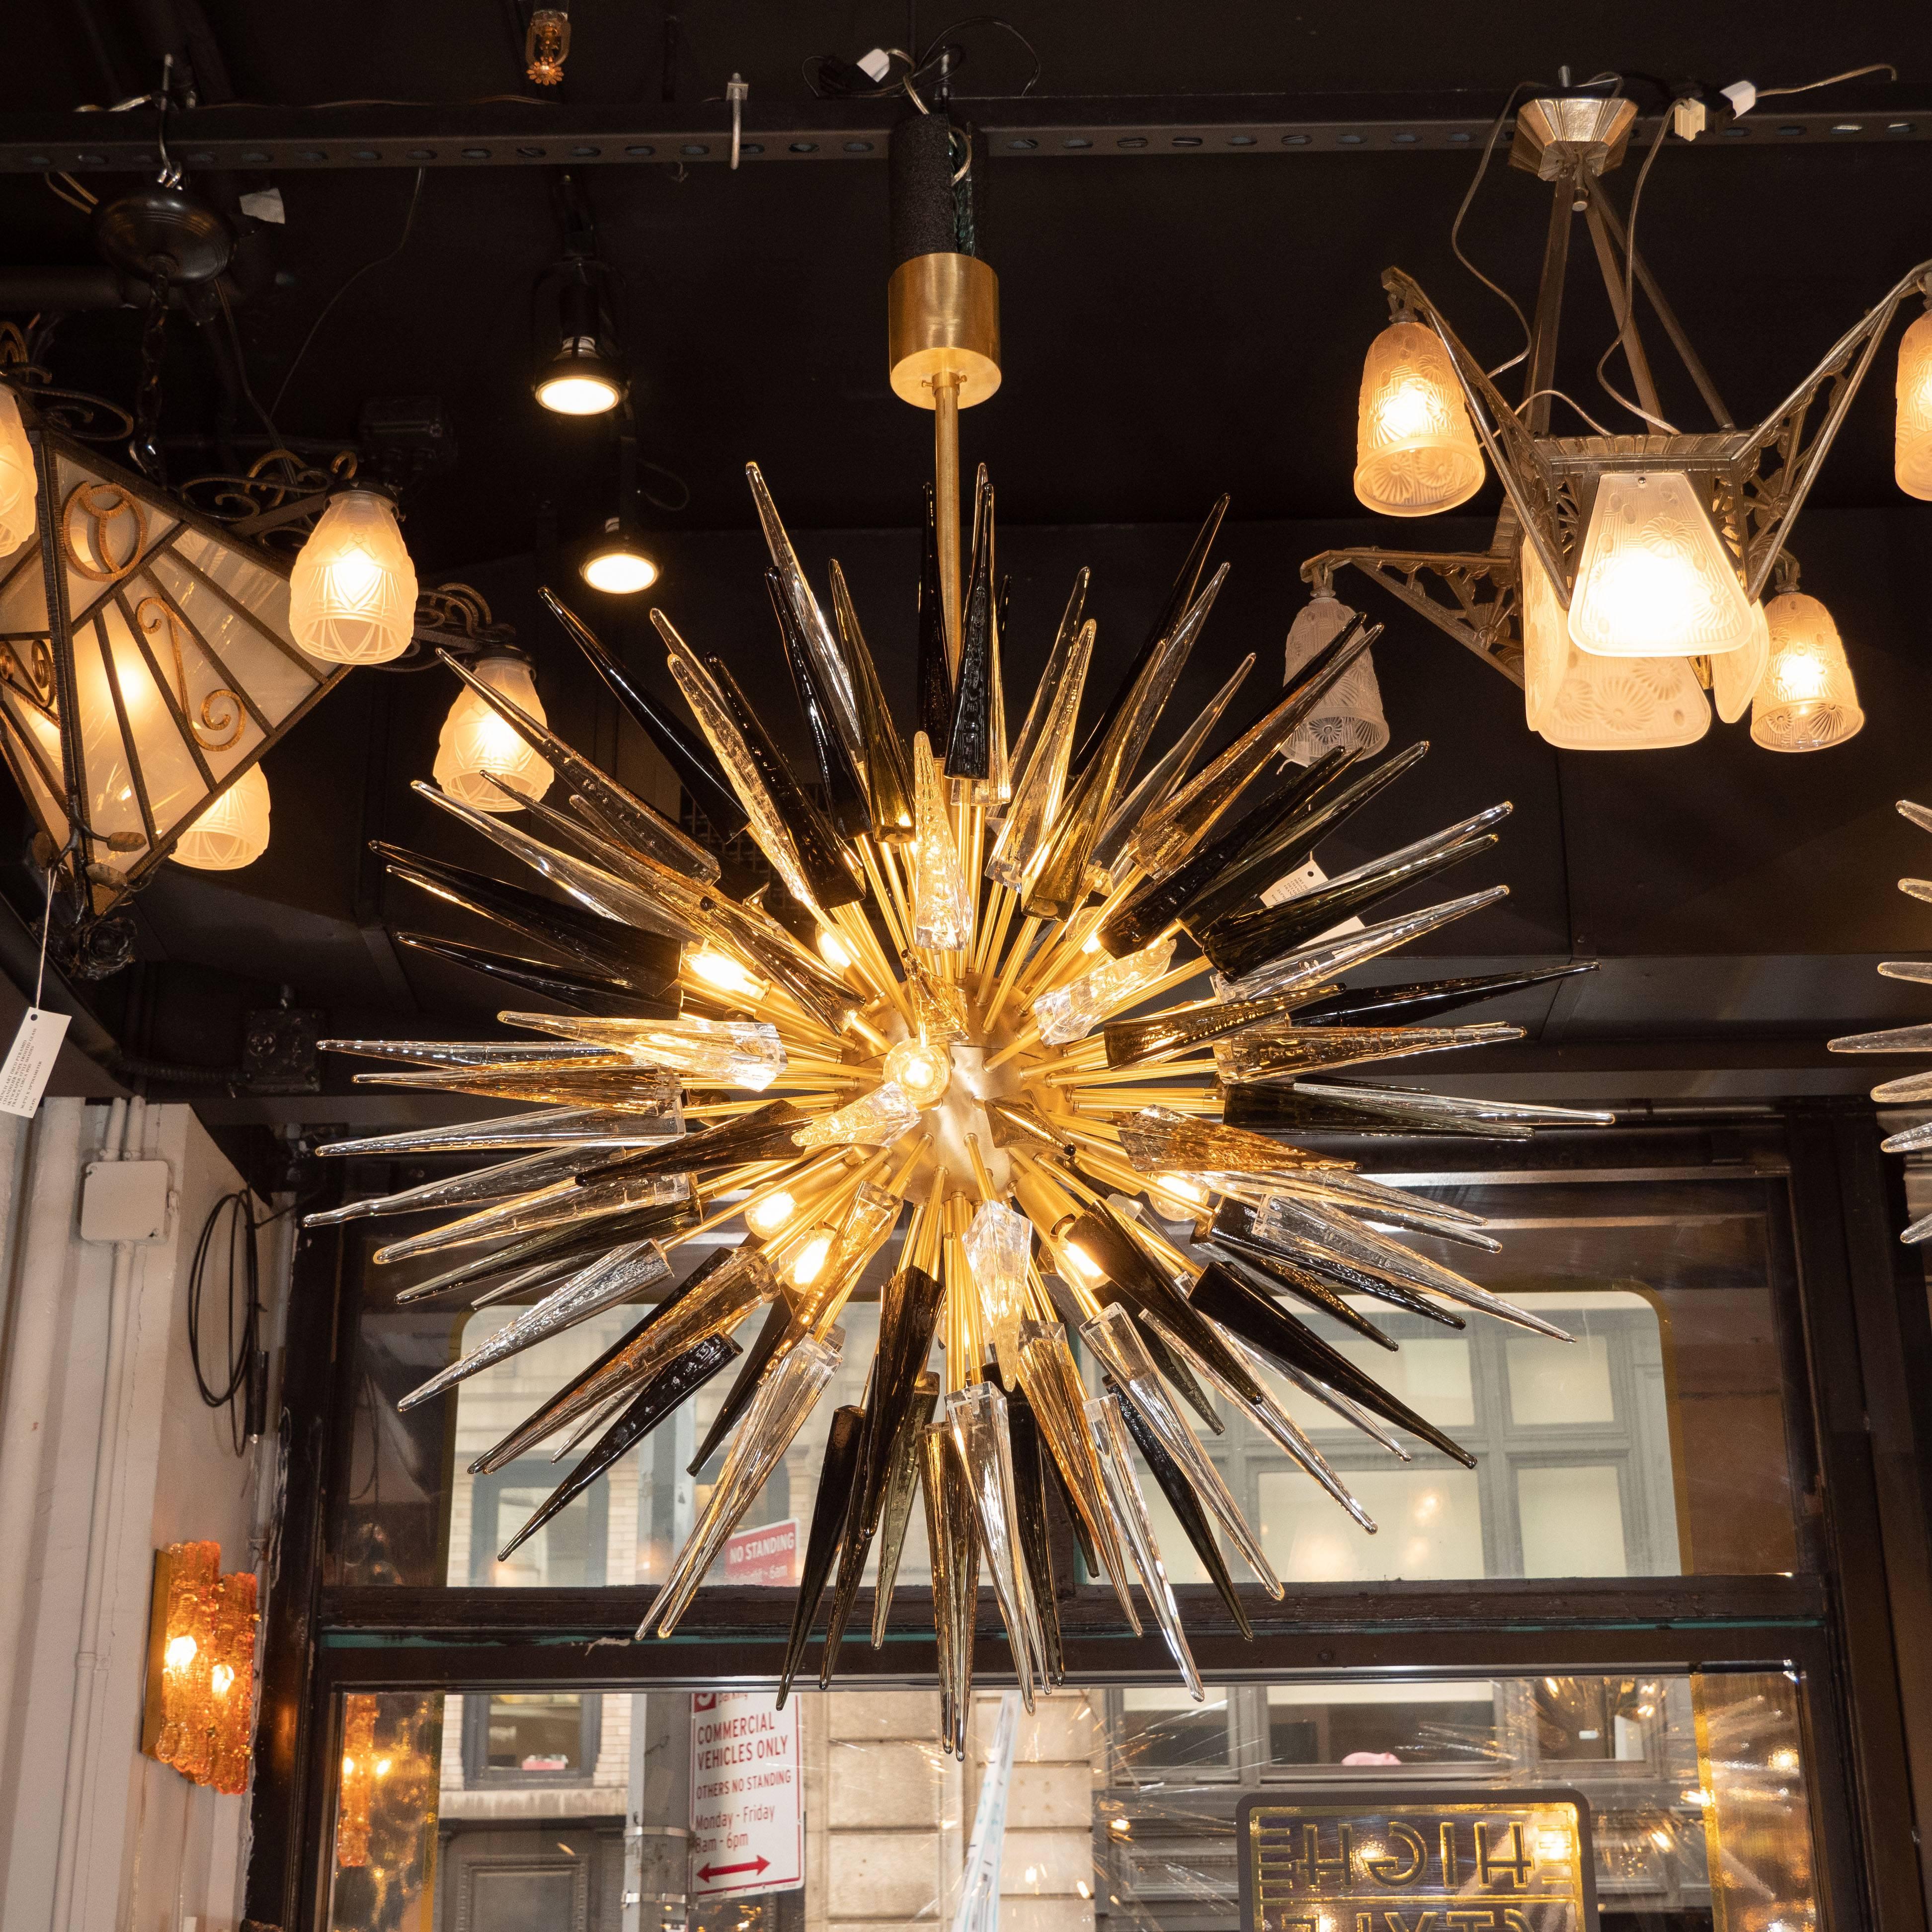 This stunning and graphic modernist chandelier was realized in Murano, Italy- the islands off the coast of Venice renowned for centuries for their superlative quality glass. It features an abundance of handblown Murano glass obelisks in translucent,